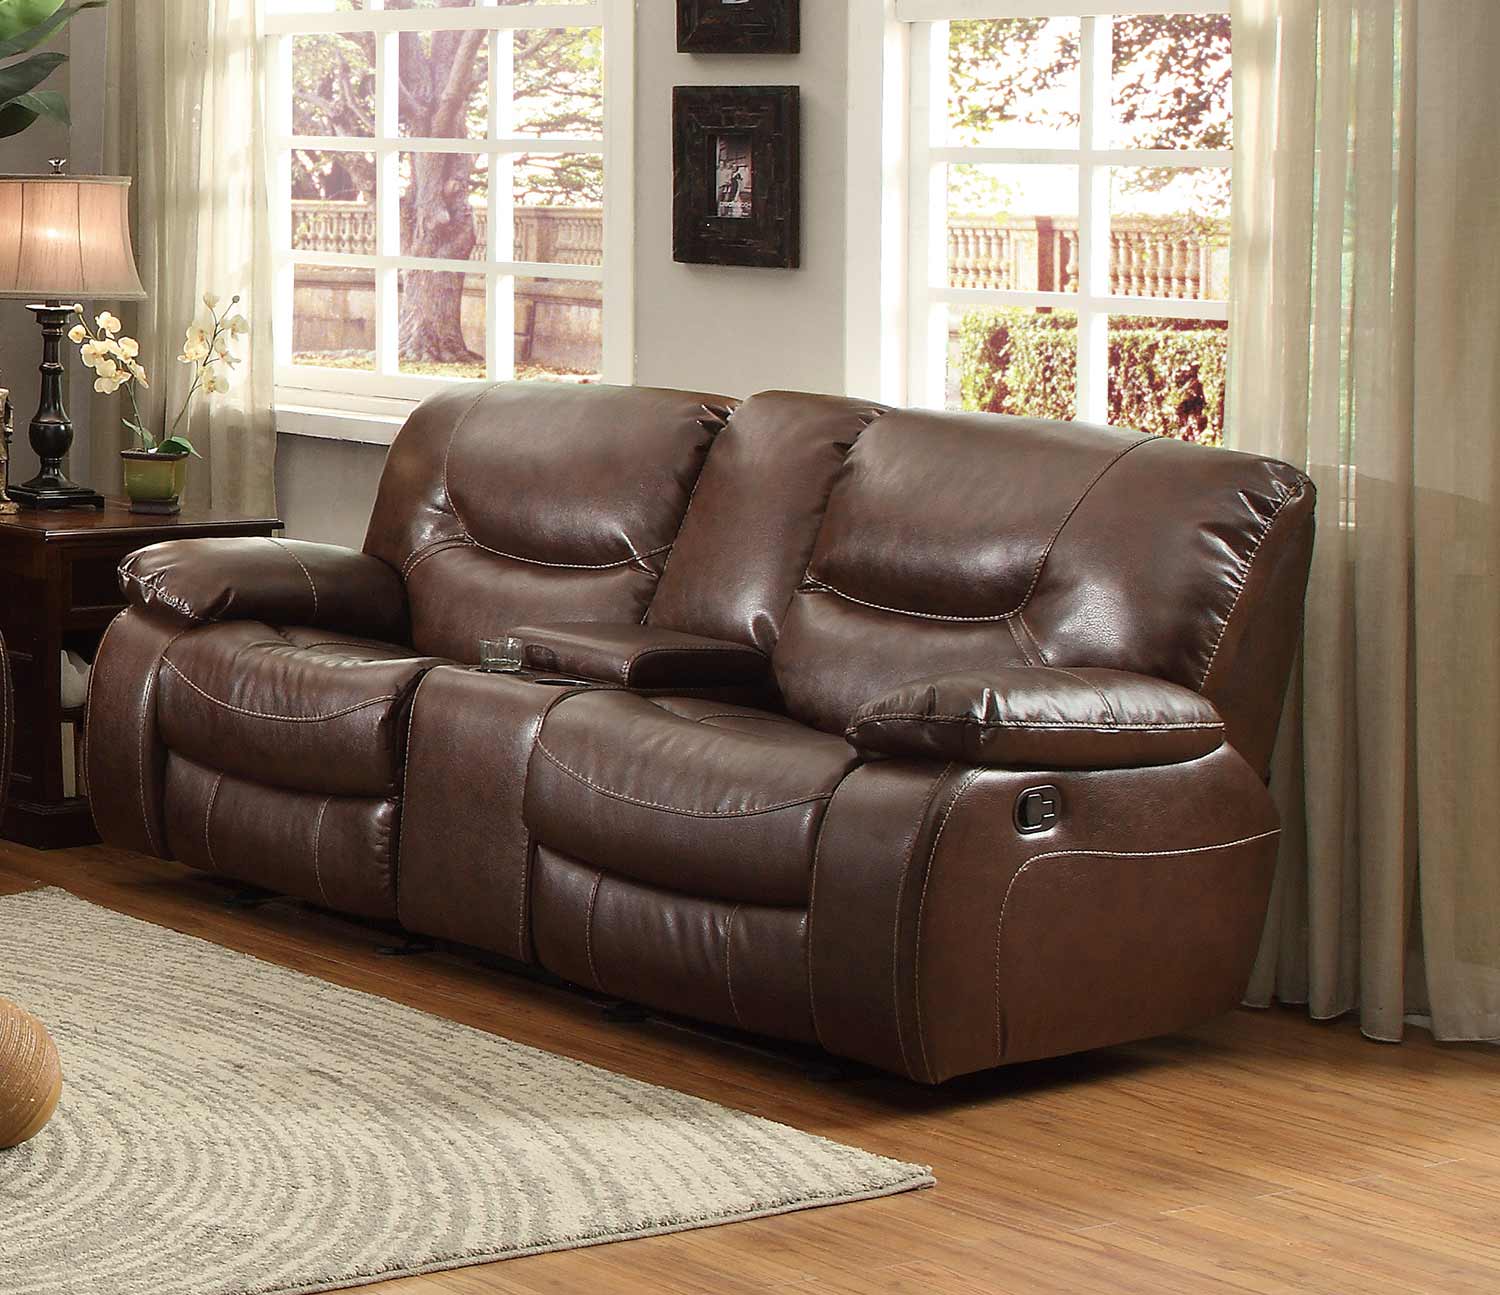 Homelegance Leetown Double Glider Reclining Love Seat with Center Console - Dark Brown